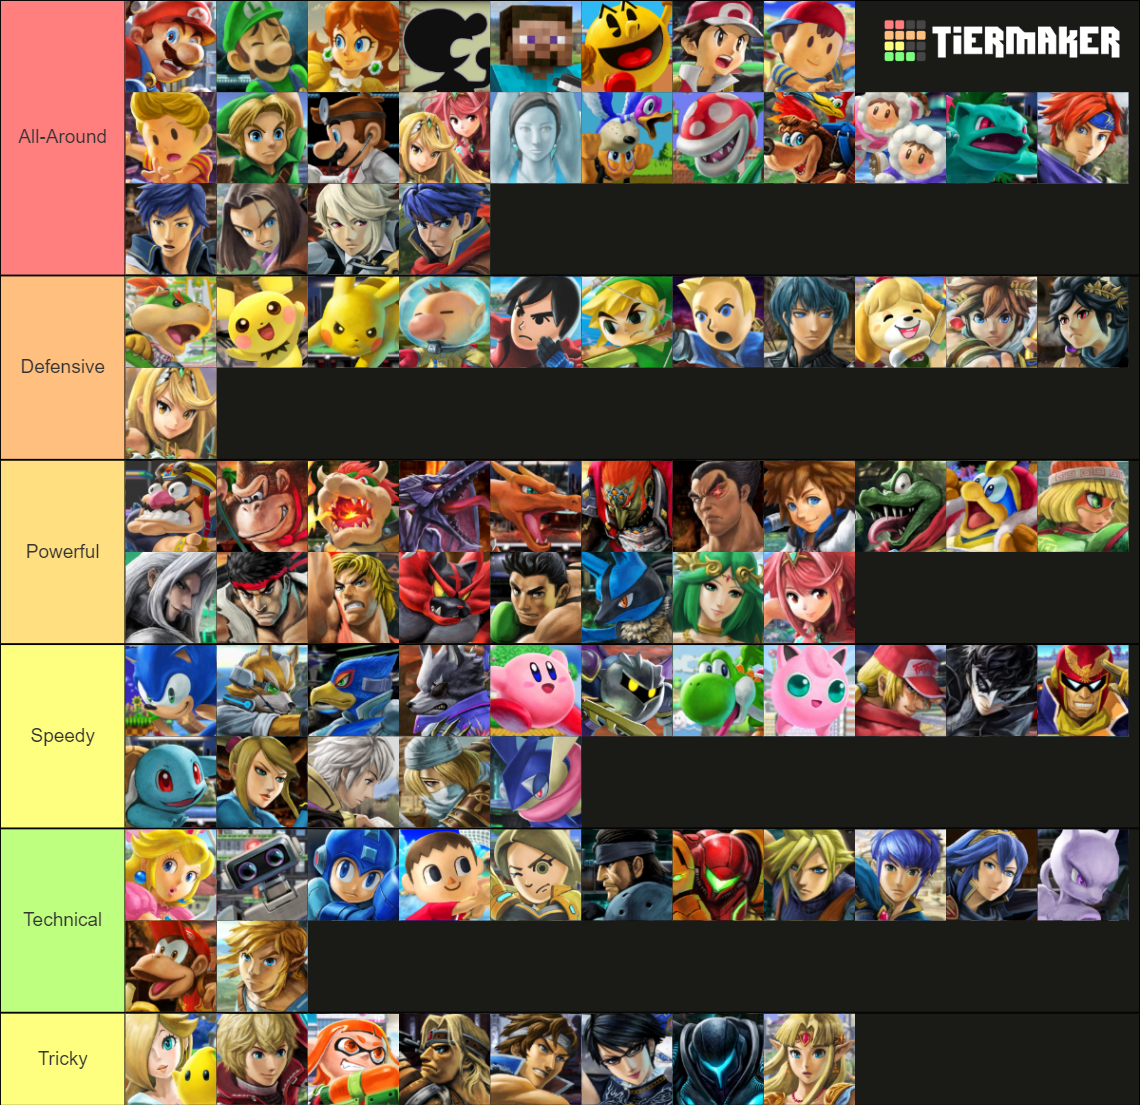 sla Vakantie zacht SSBU characters ranked by mario tennis aces character types (sorry if the  image doesnt load) | Fandom